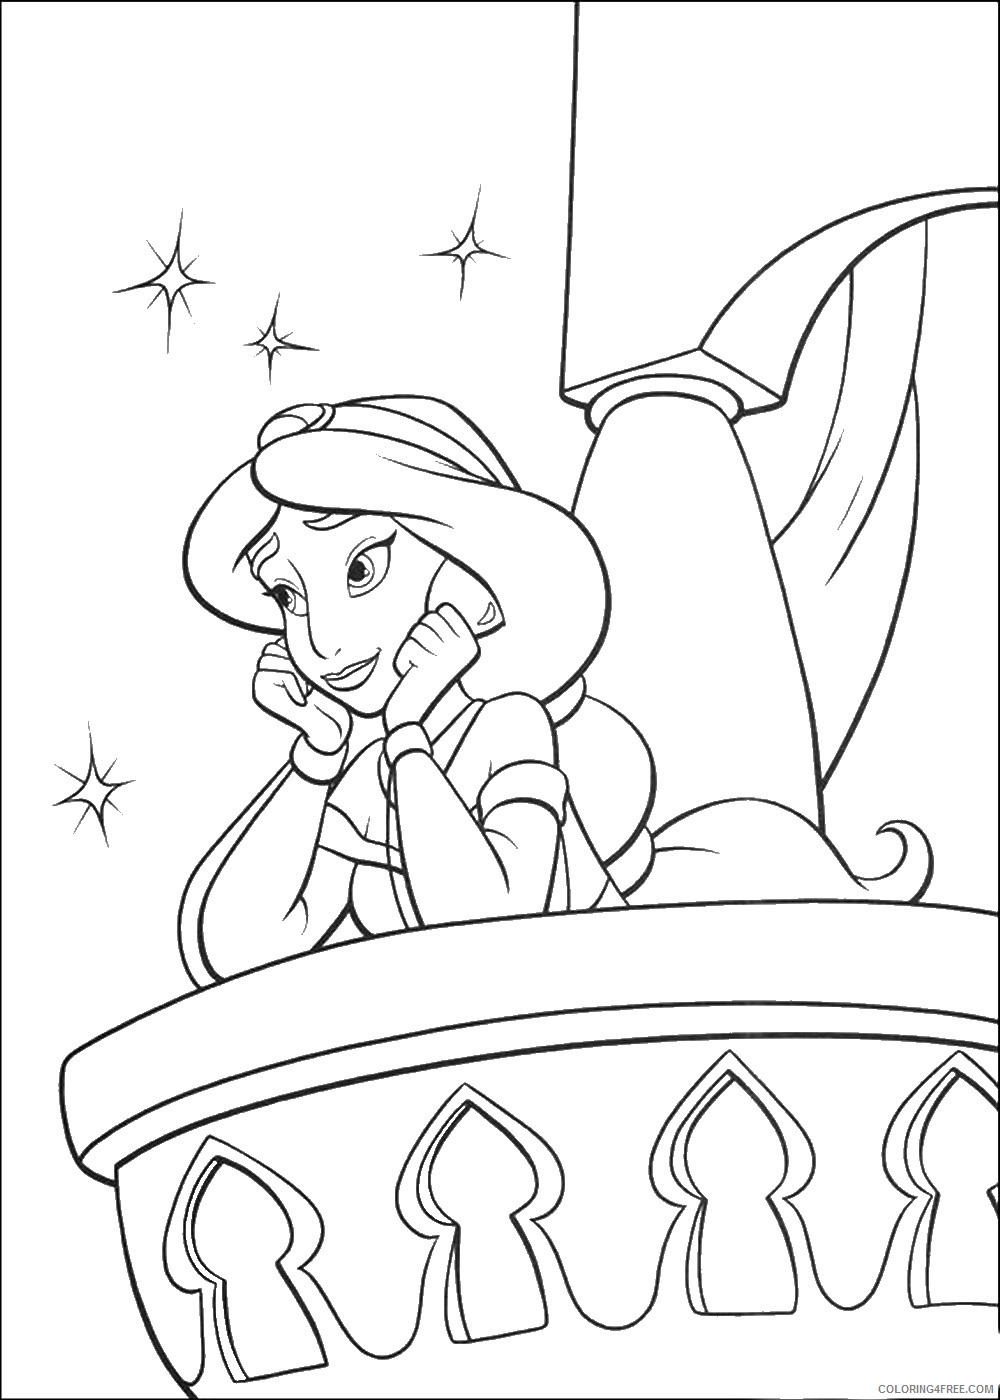 Aladdin Coloring Pages Cartoons aladdin_05 Printable 2020 0285 Coloring4free